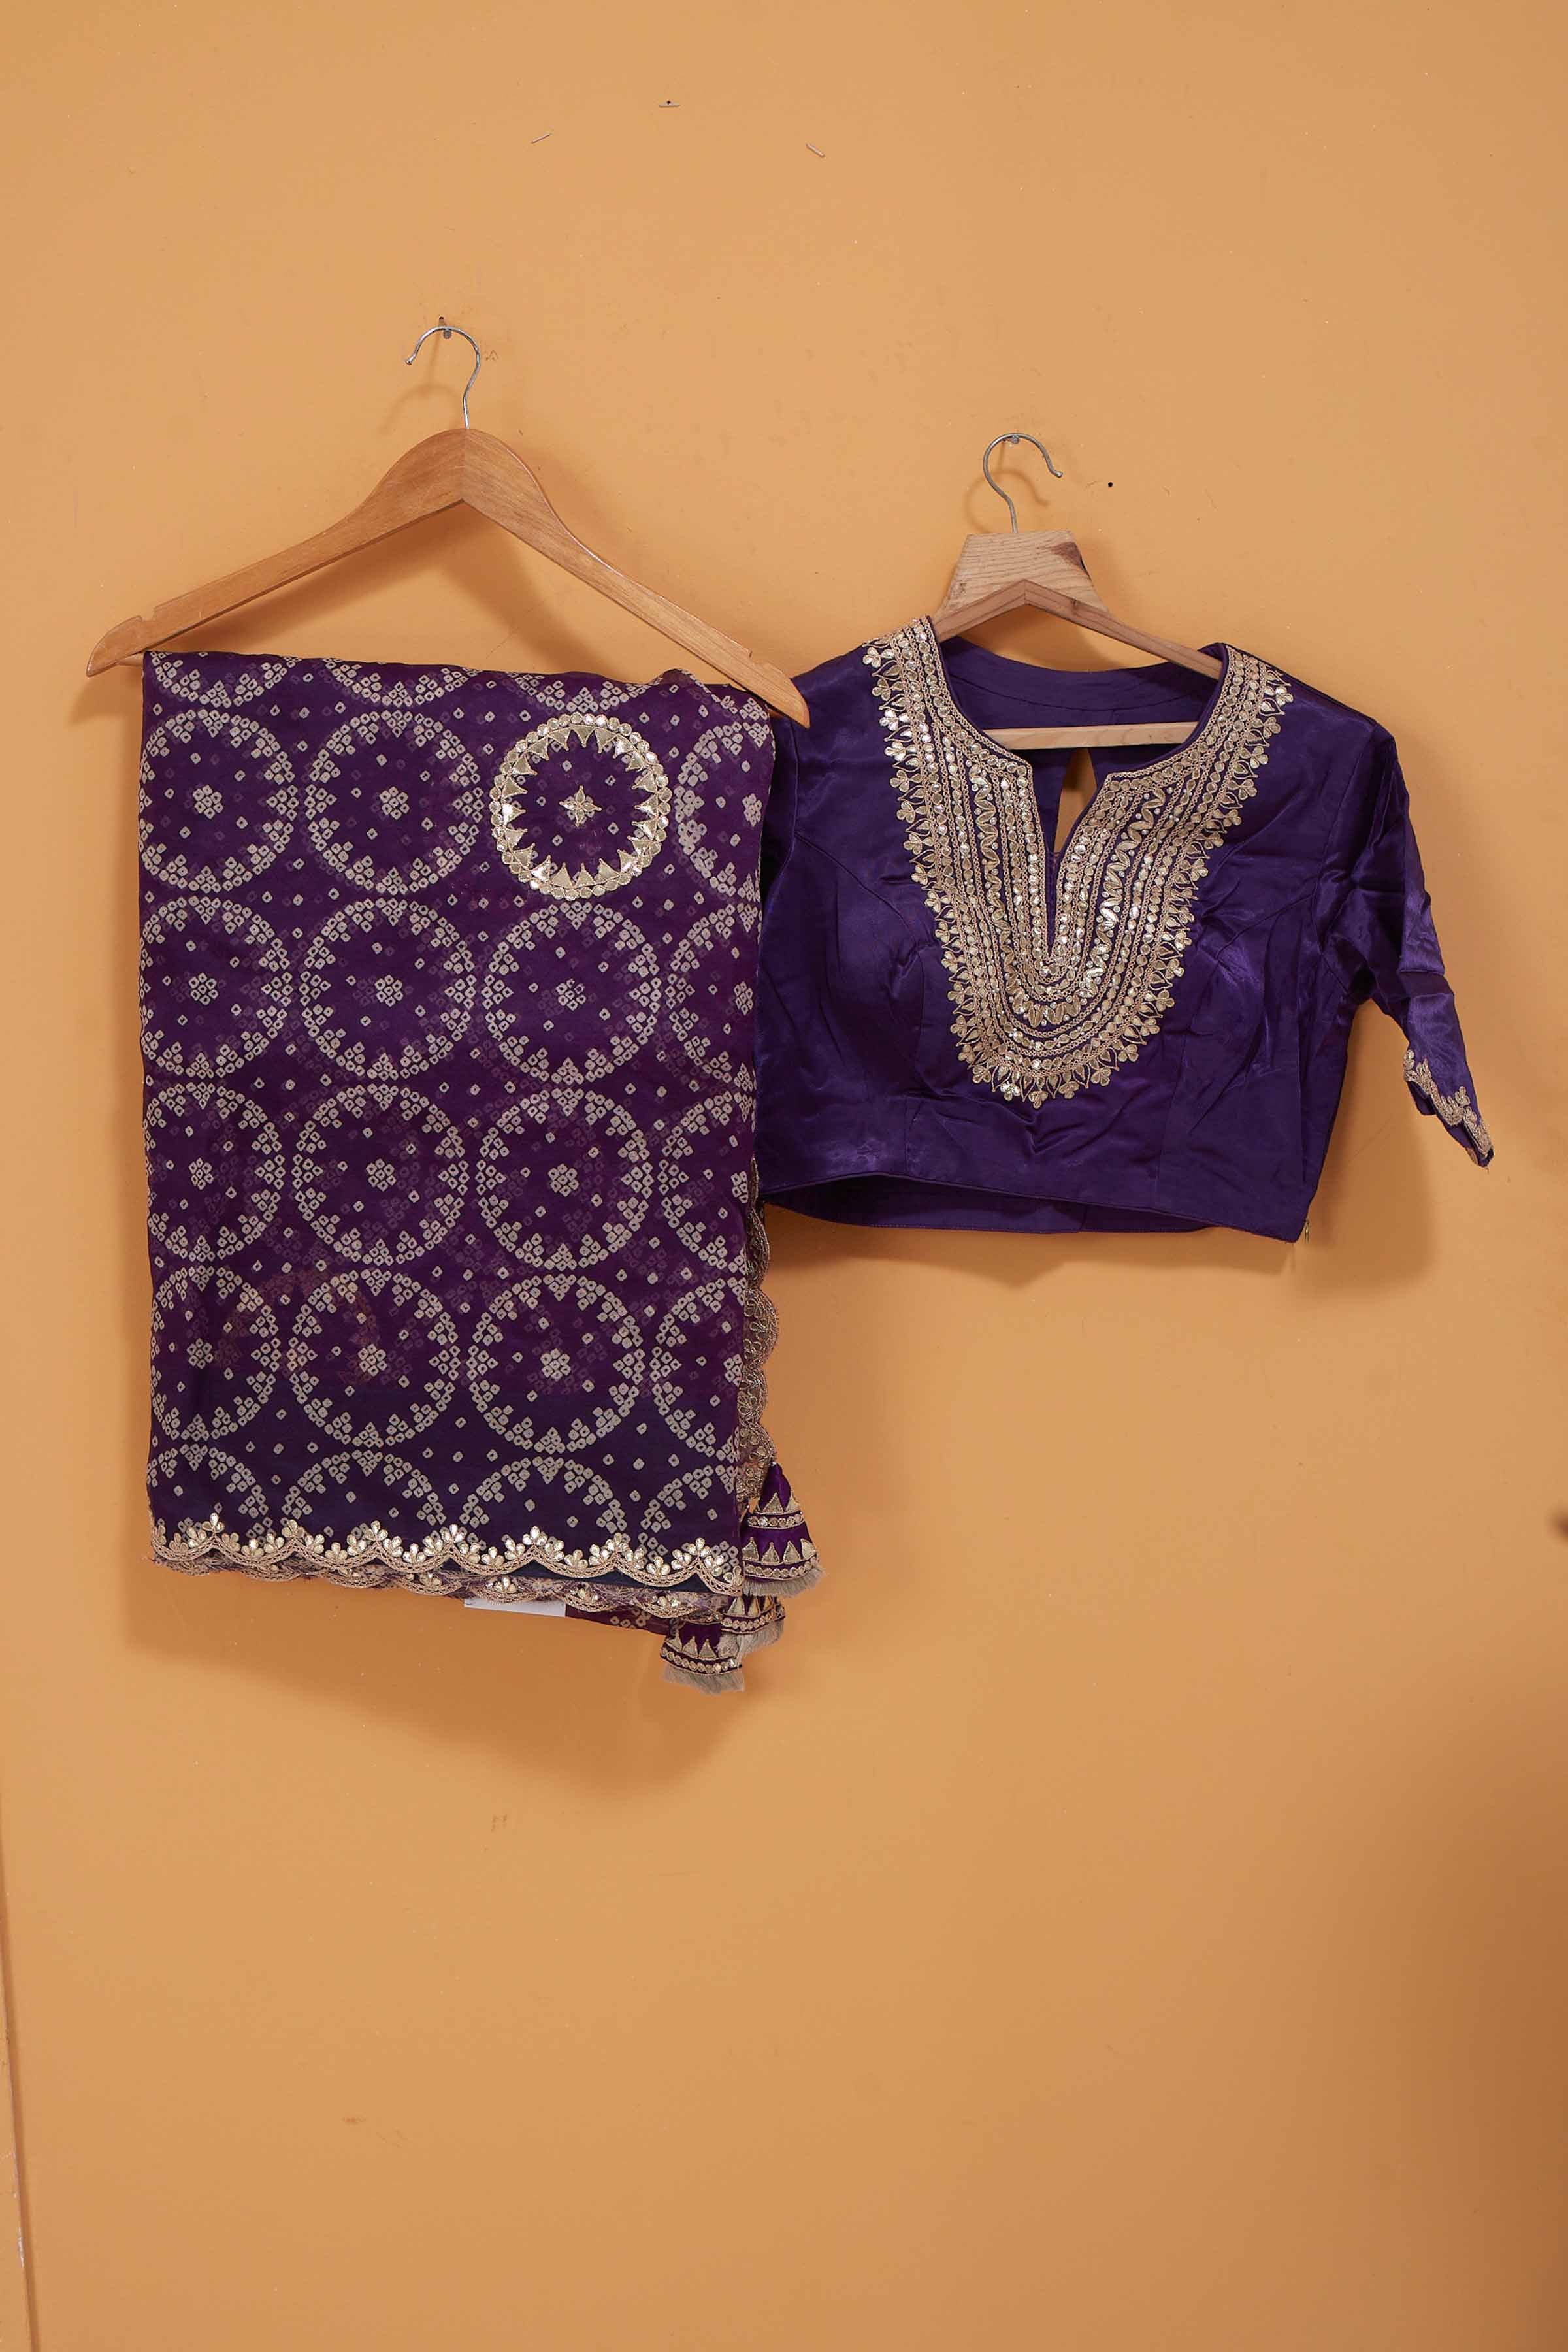 Buy beautiful purple bandhej gota work organza silk sari online in USA with designer blouse. Look royal at weddings and festive occasions in exquisite designer sarees, handwoven sarees, pure silk saris, Banarasi sarees, Kanchipuram silk sarees from Pure Elegance Indian saree store in USA. -blouse